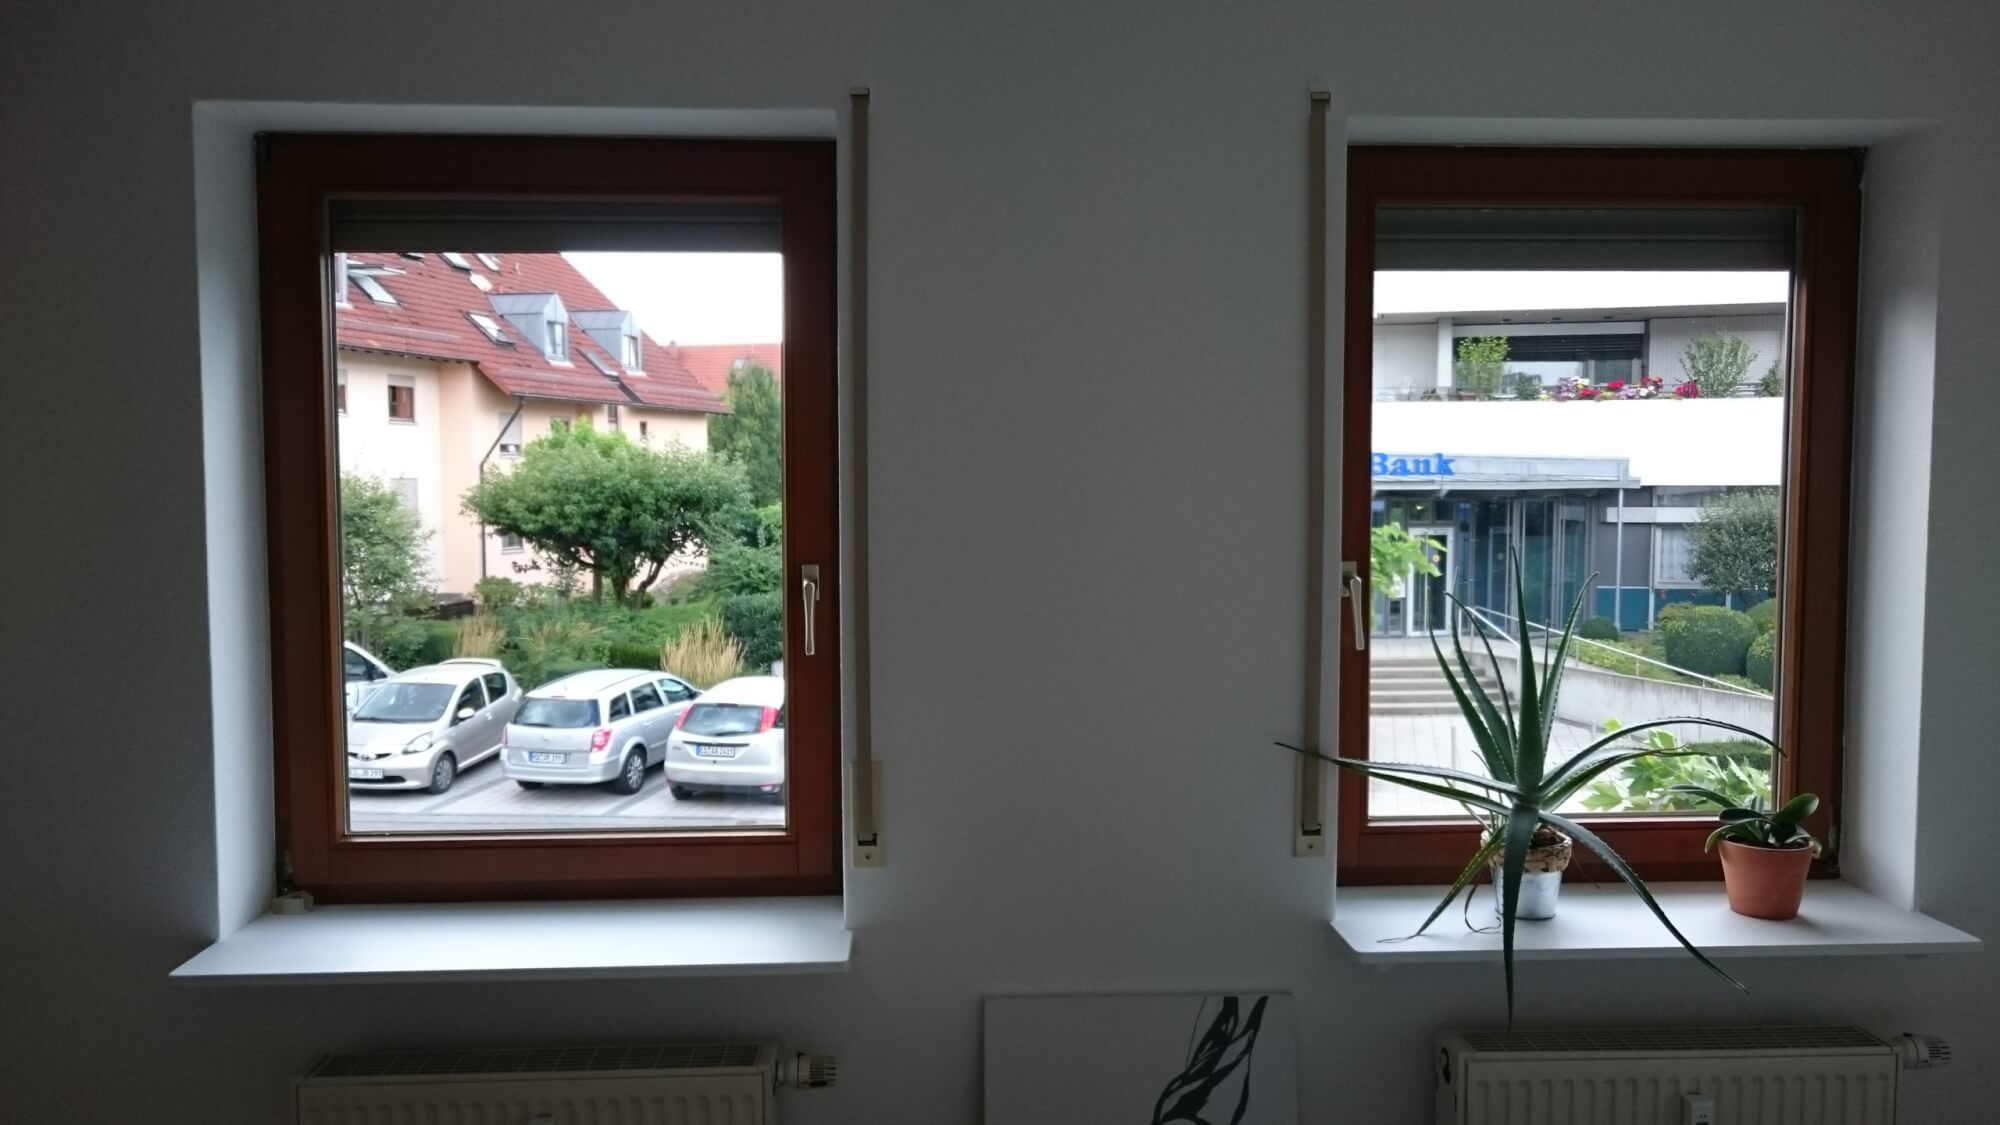 Window sill renovation from grey to white, with an S115 film coating - after